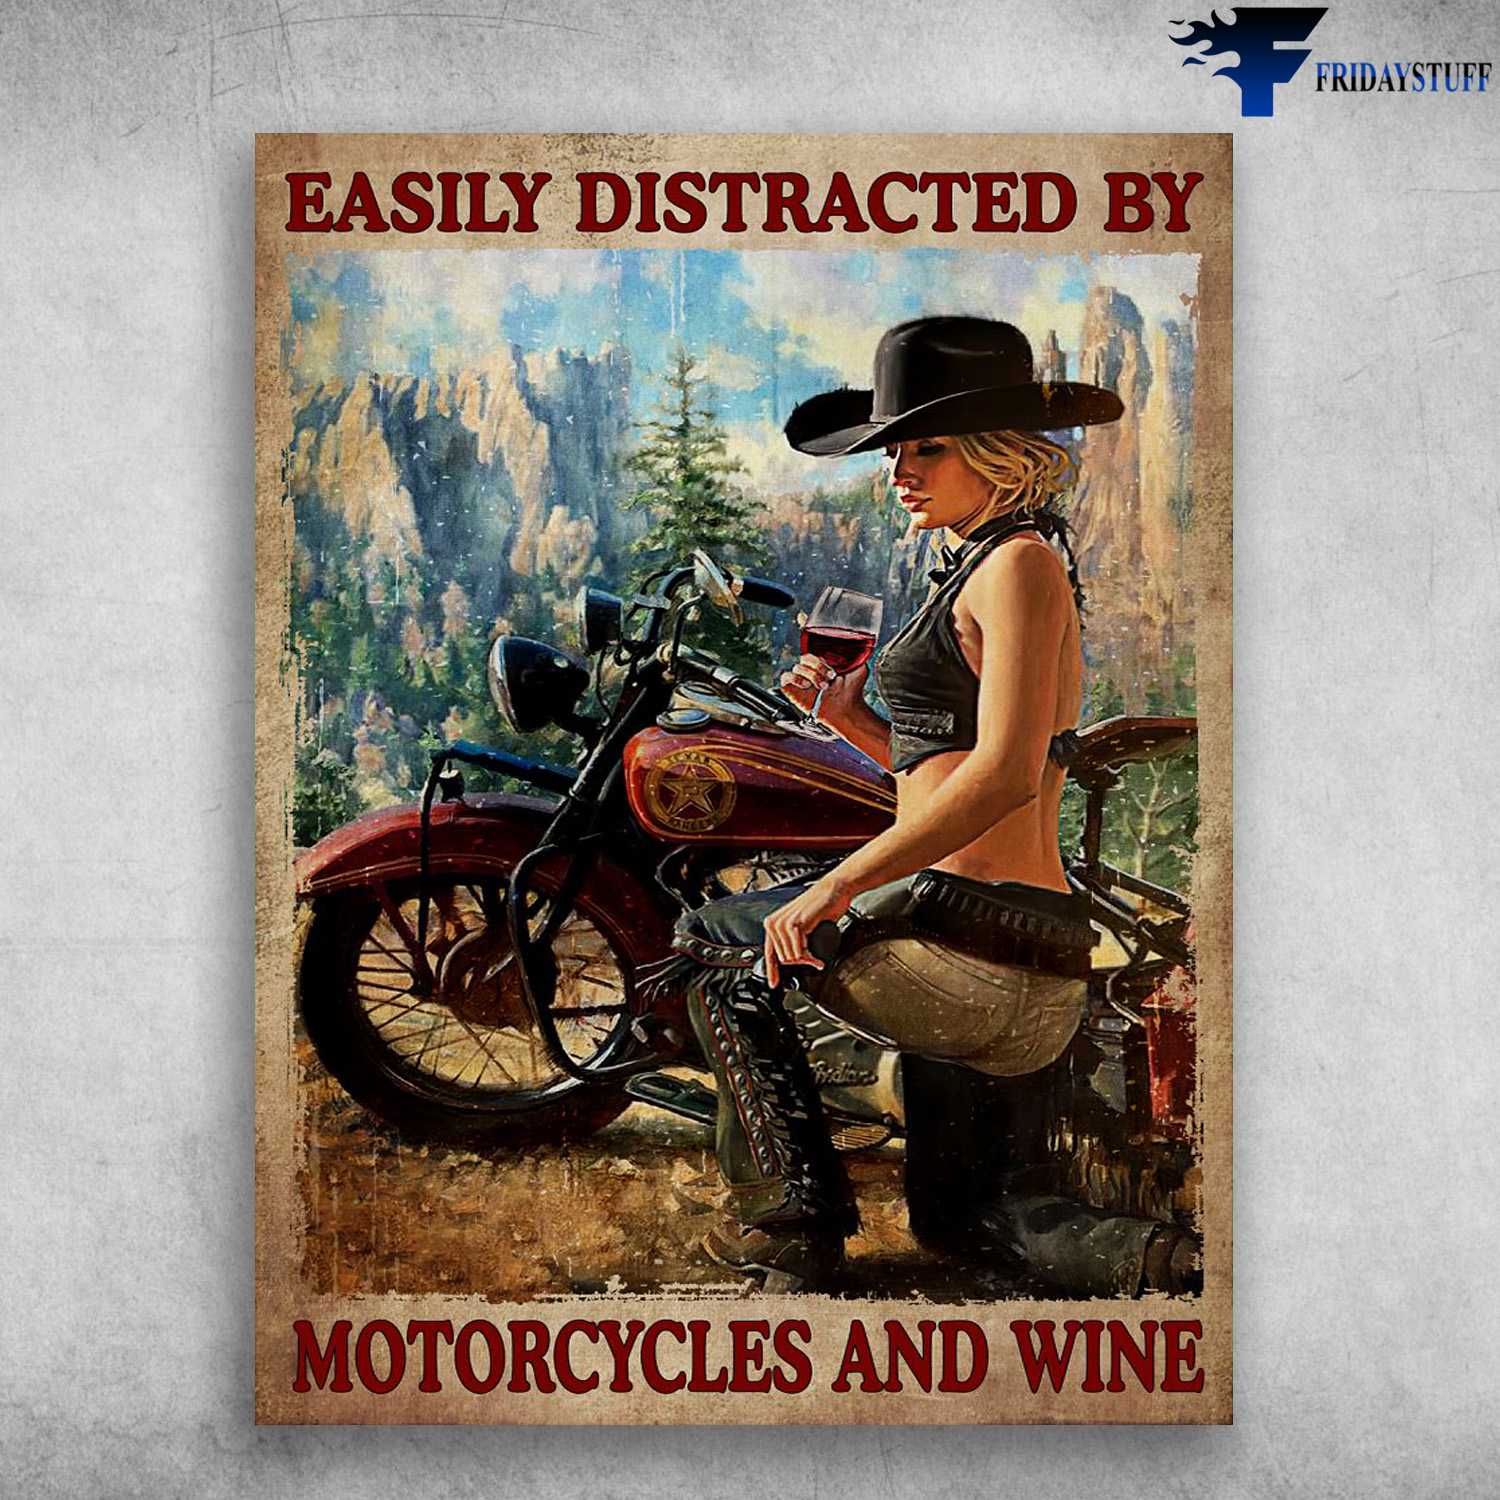 Motorcycles And Drink, Motorcycle Lover - Easily Distracted By Motorcycles And Wine, Wine Lover